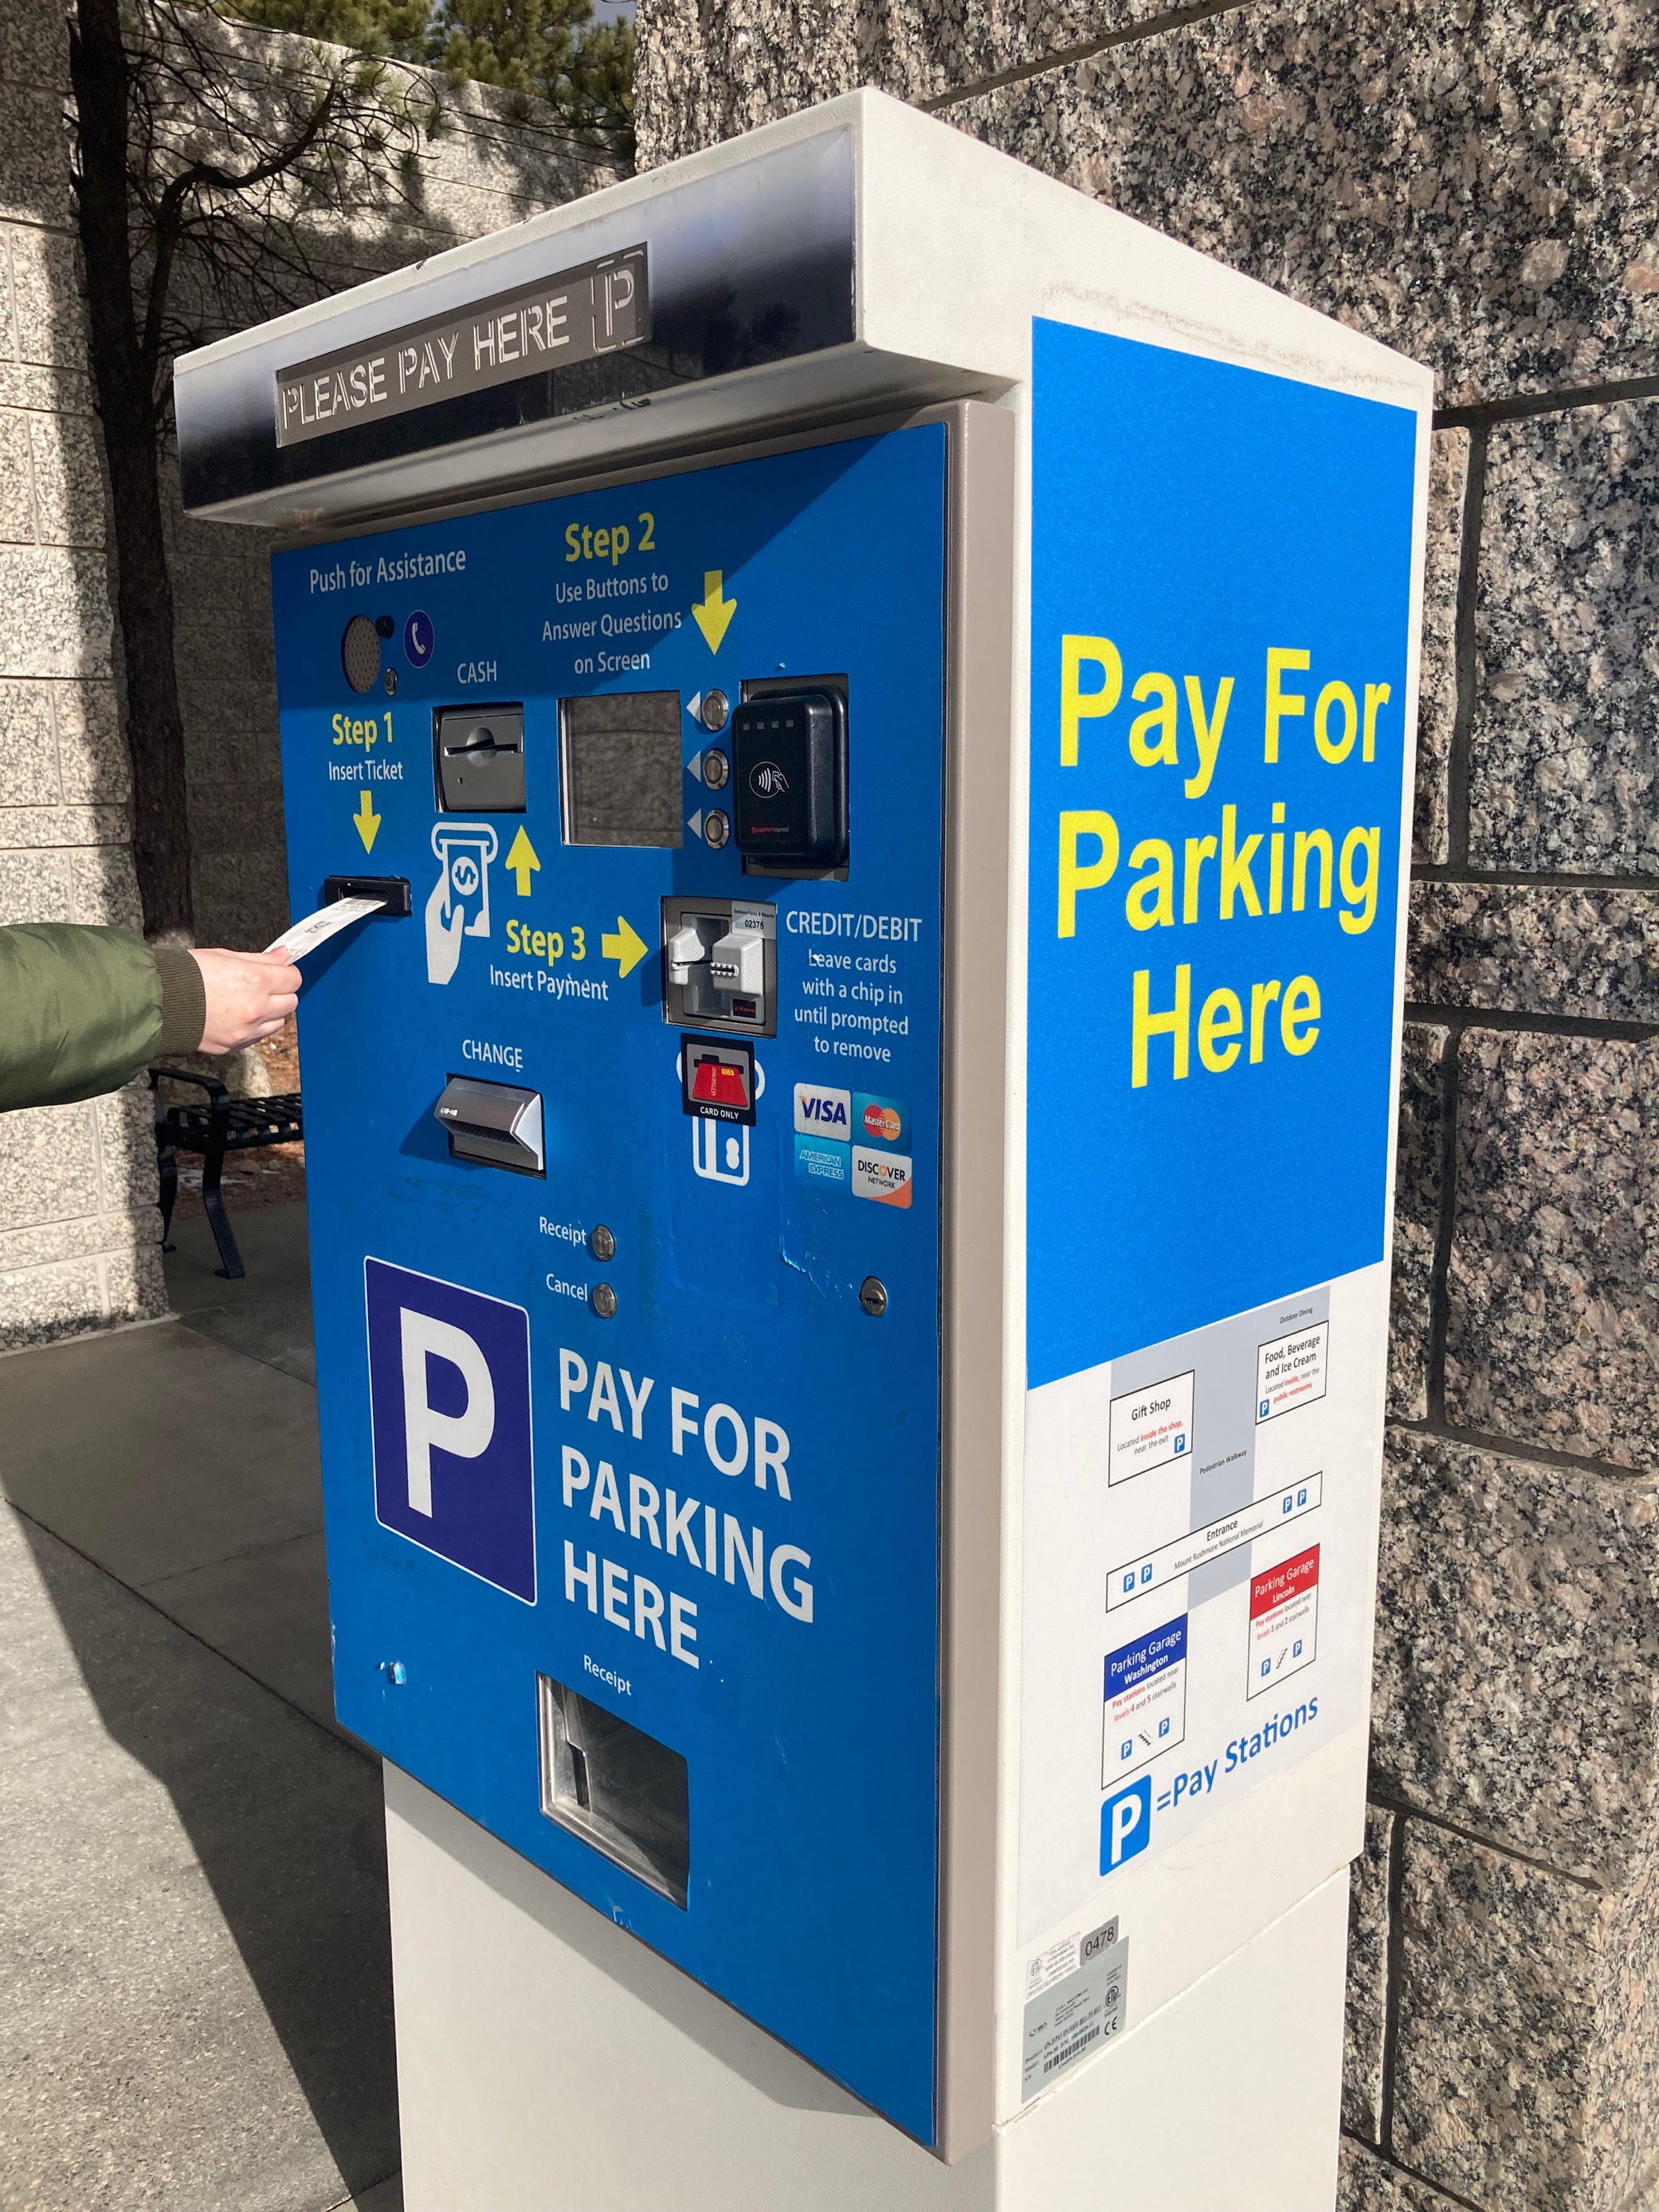 A visitor inserts a ticket into a pay-on-foot station to pay for parking. The station has blue panels and text in yellow letters instructing visitors to pay for parking here on the side and step-by-step instructions on the front.